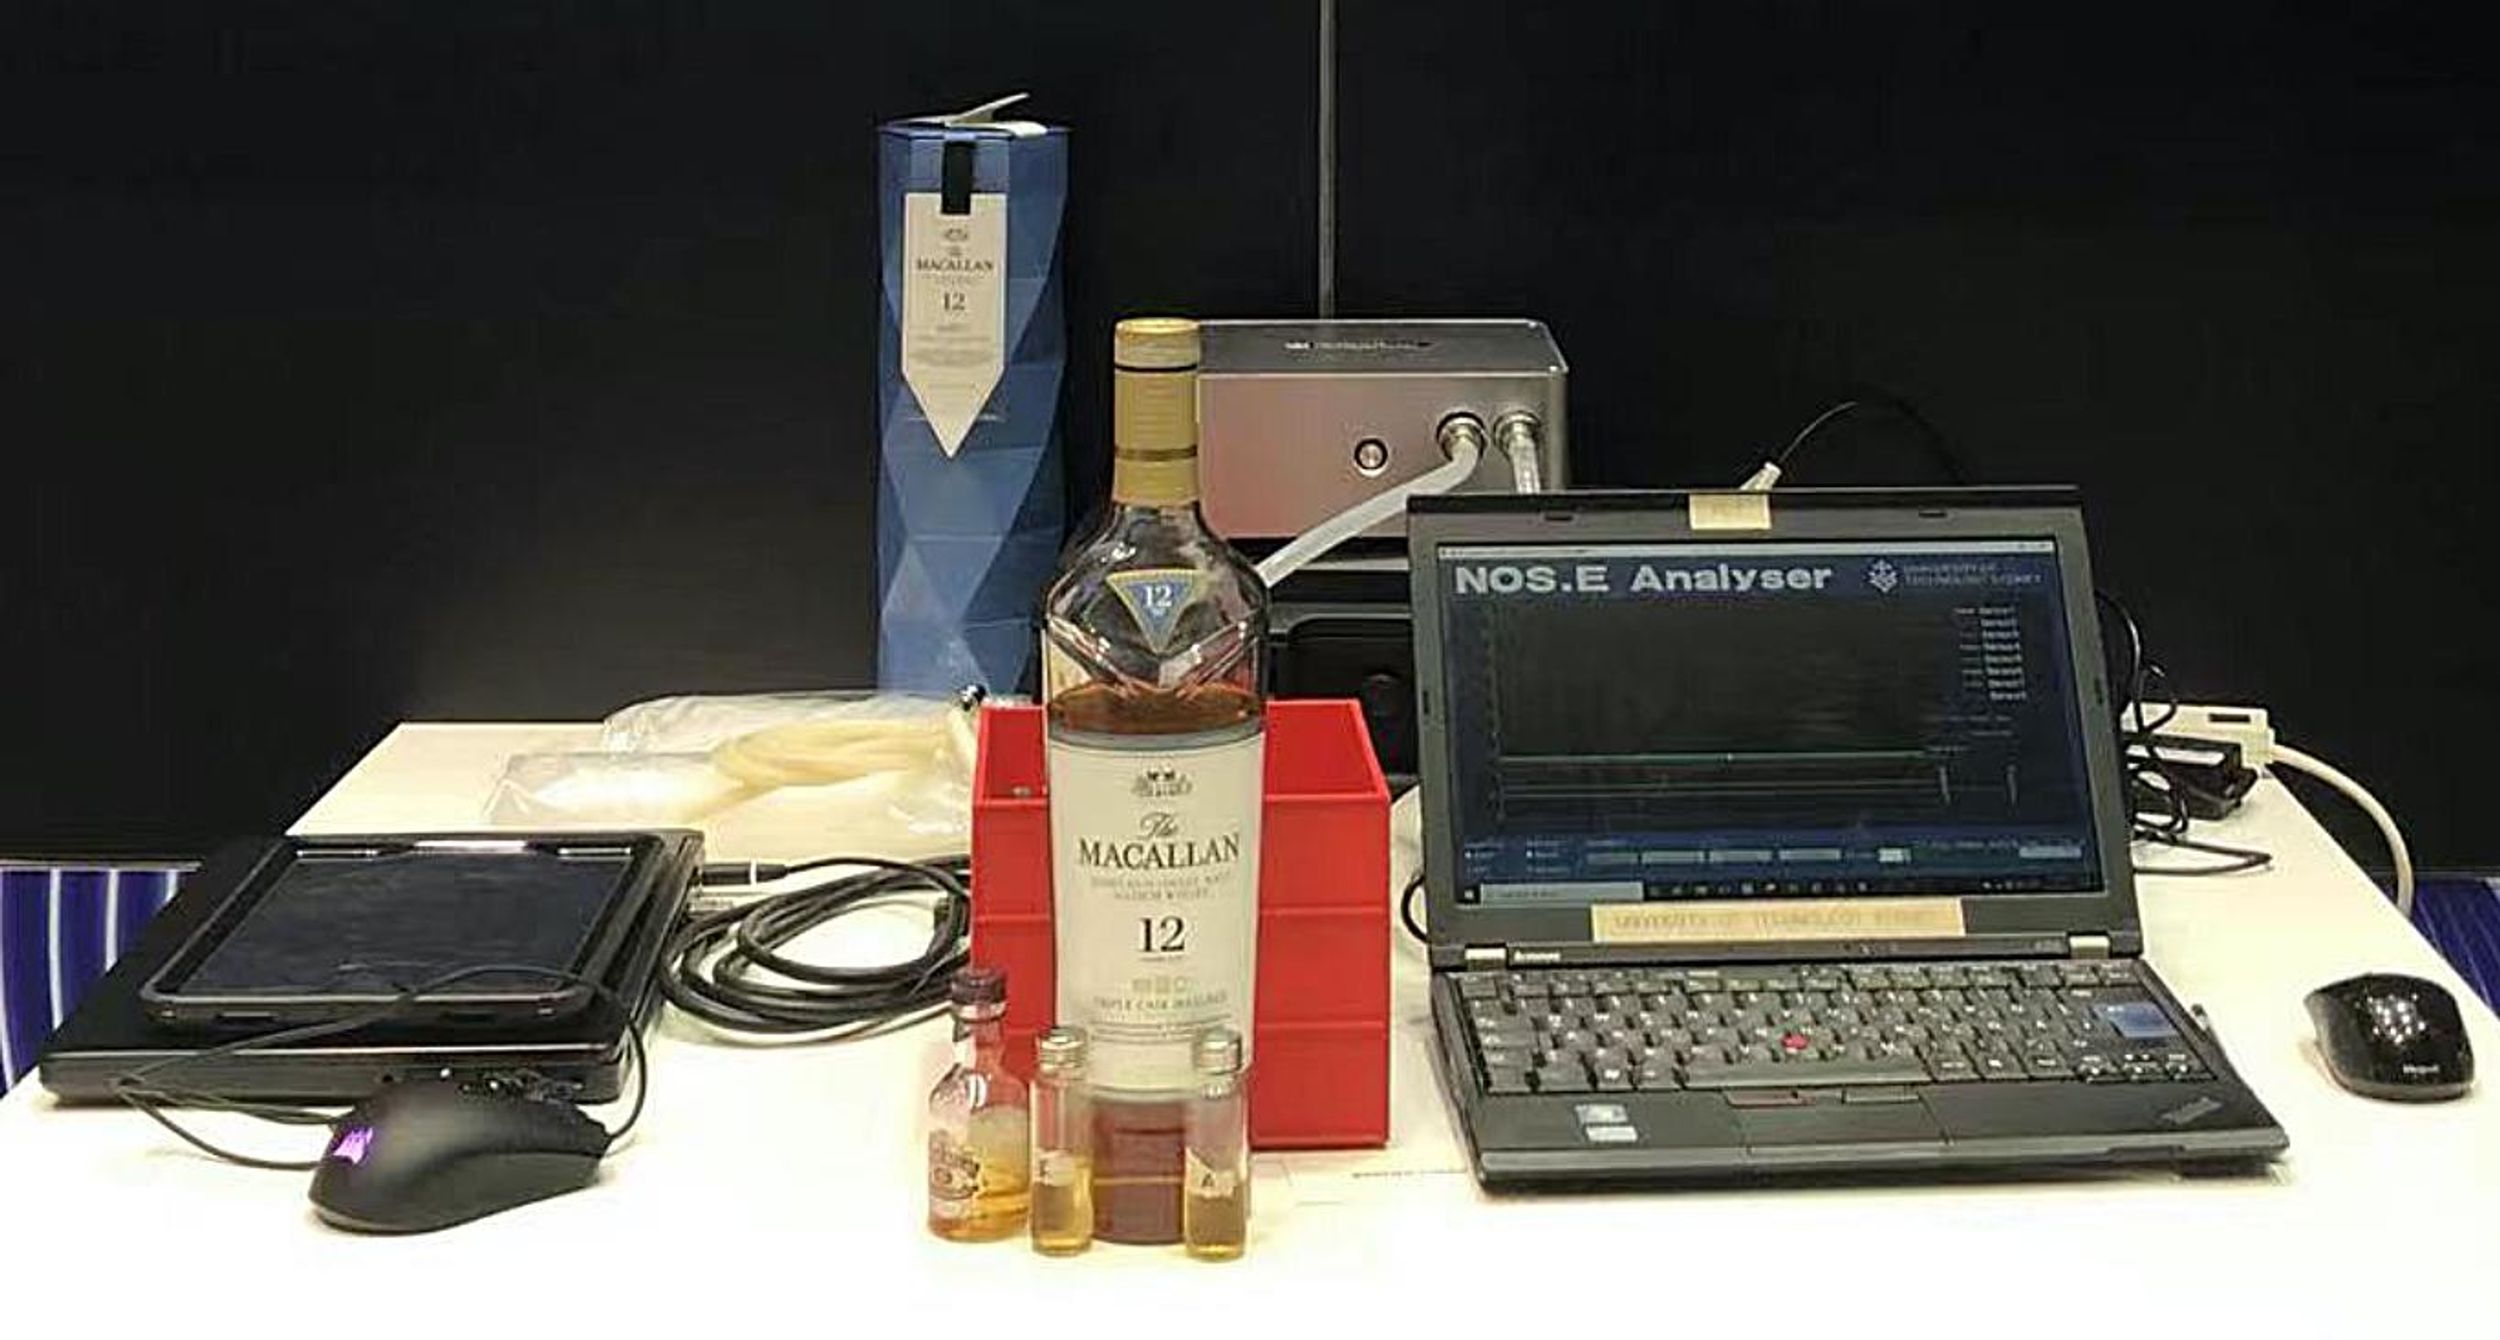 A computer is hooked up to equipment. Multiple bottles of whiskey large and small sit on the table.